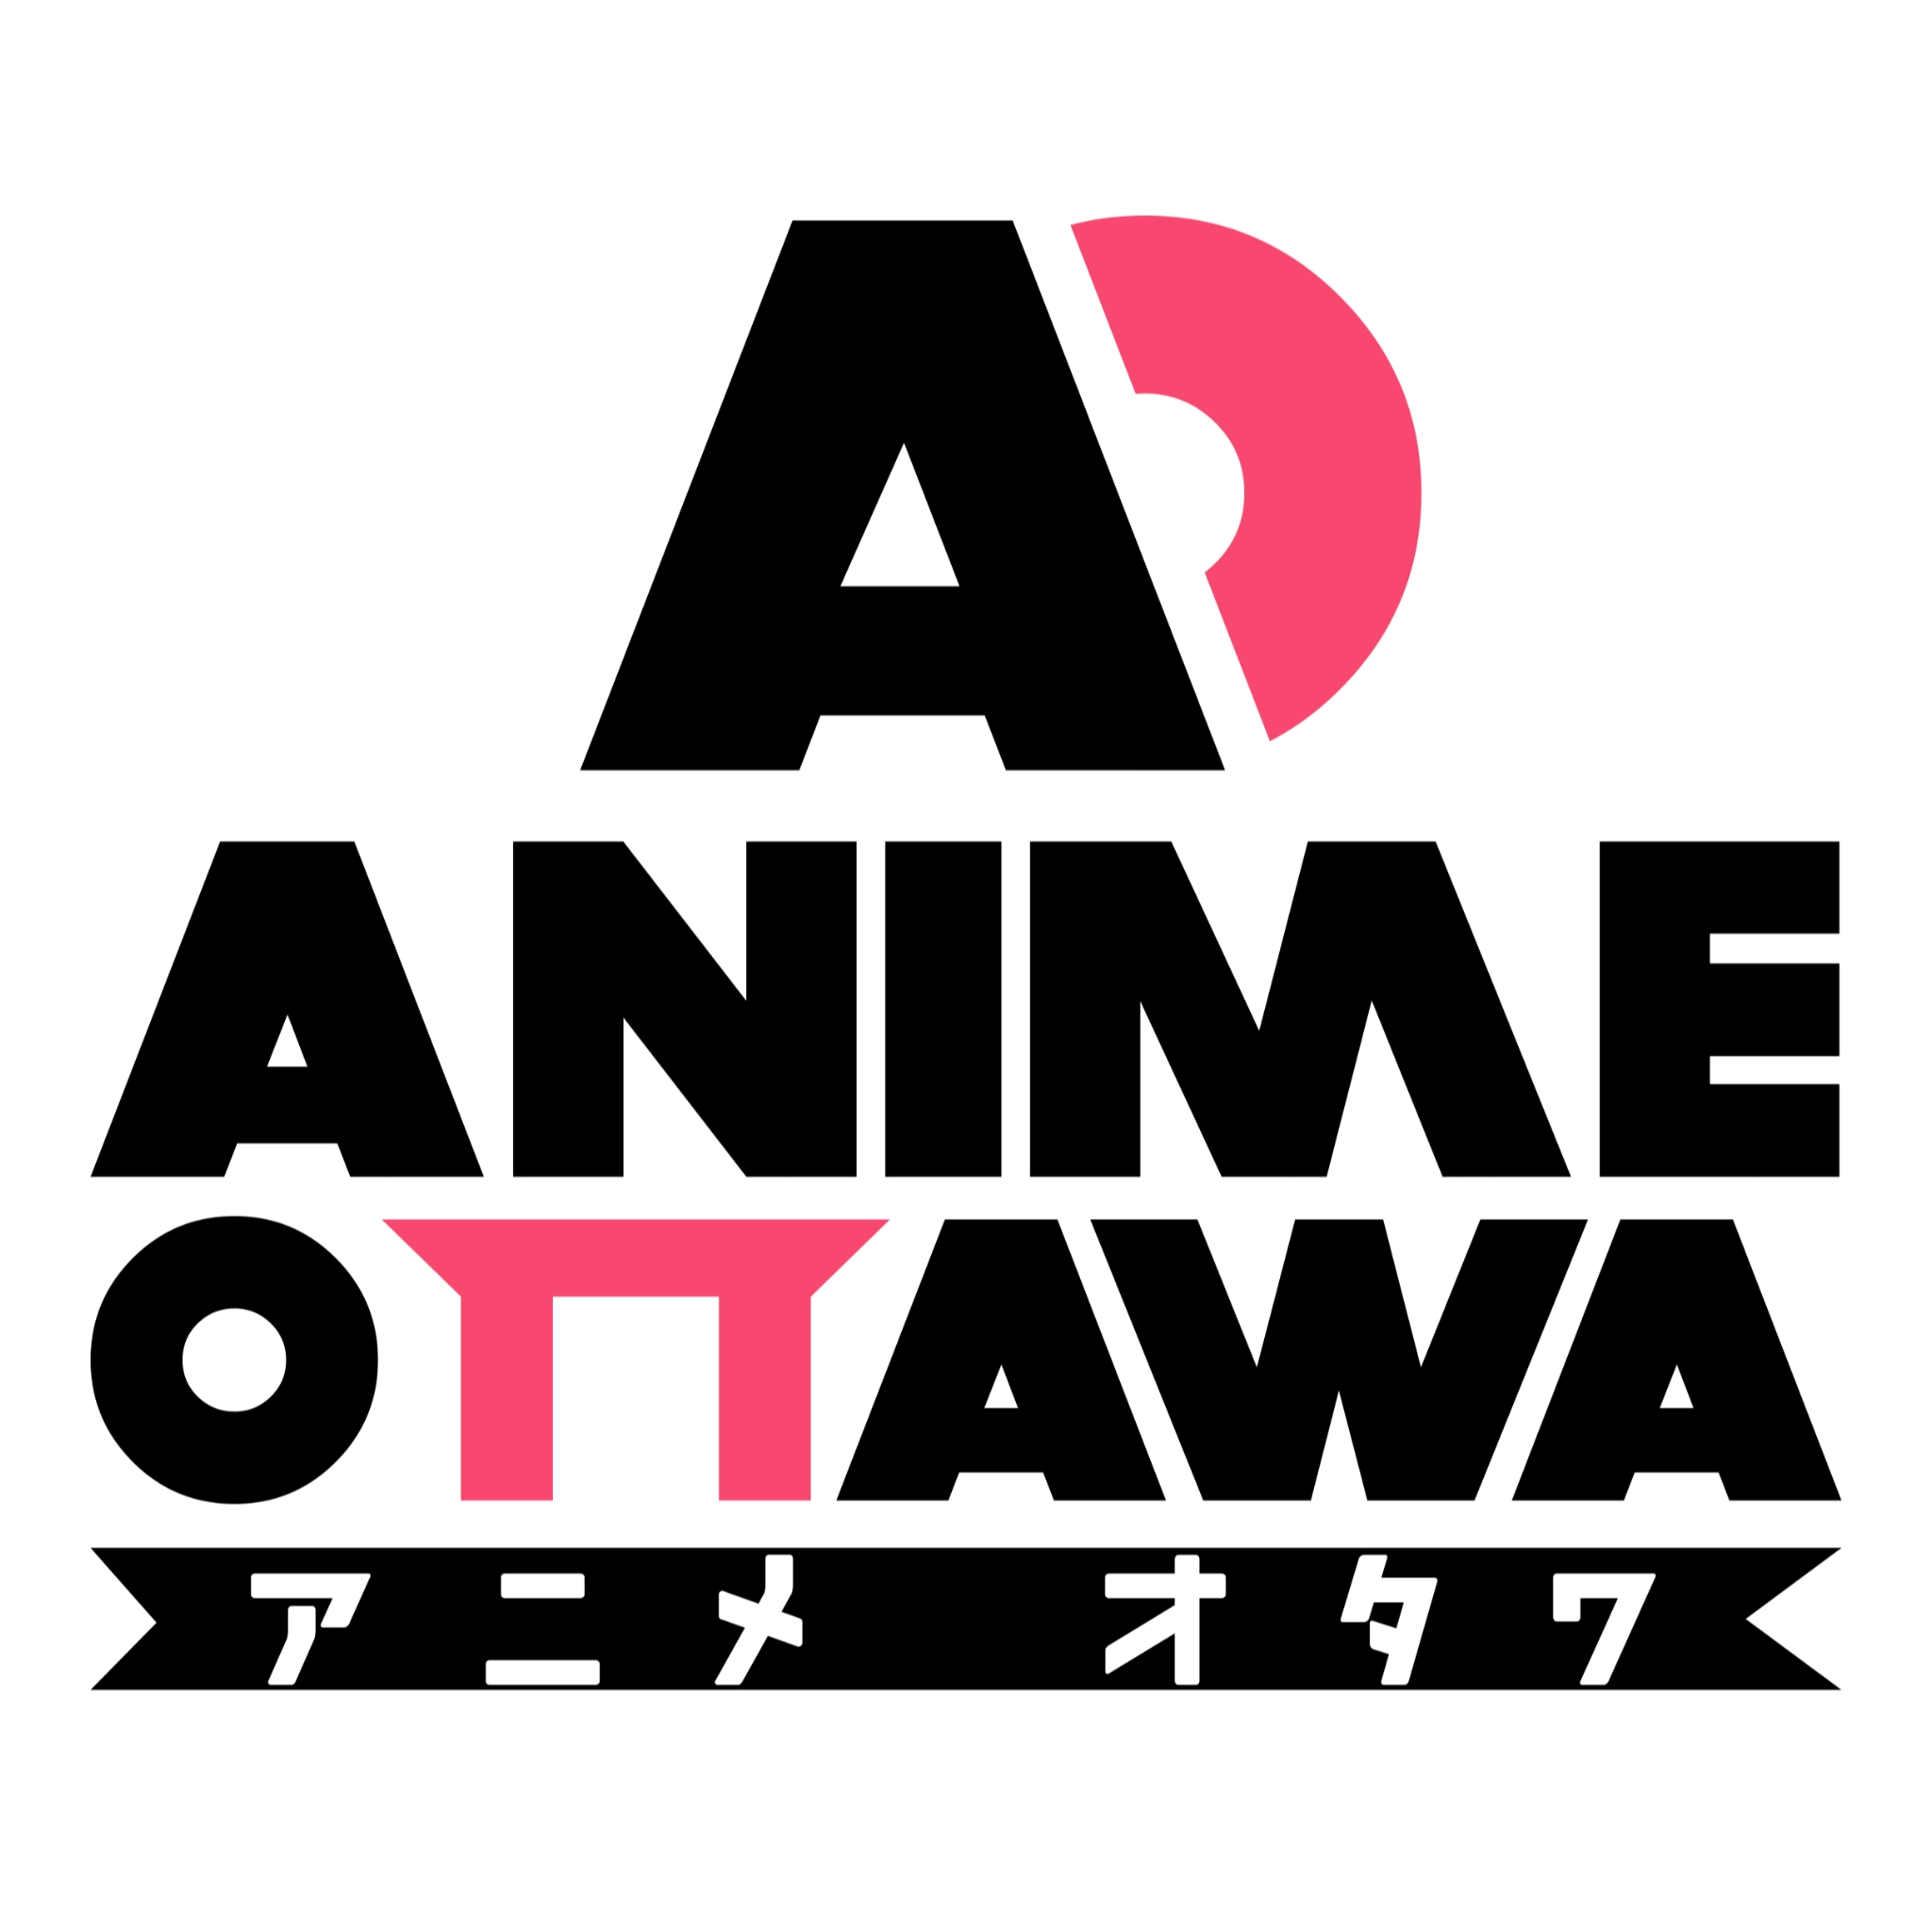 OAW: First-ever Anime Ottawa convention happening this weekend!